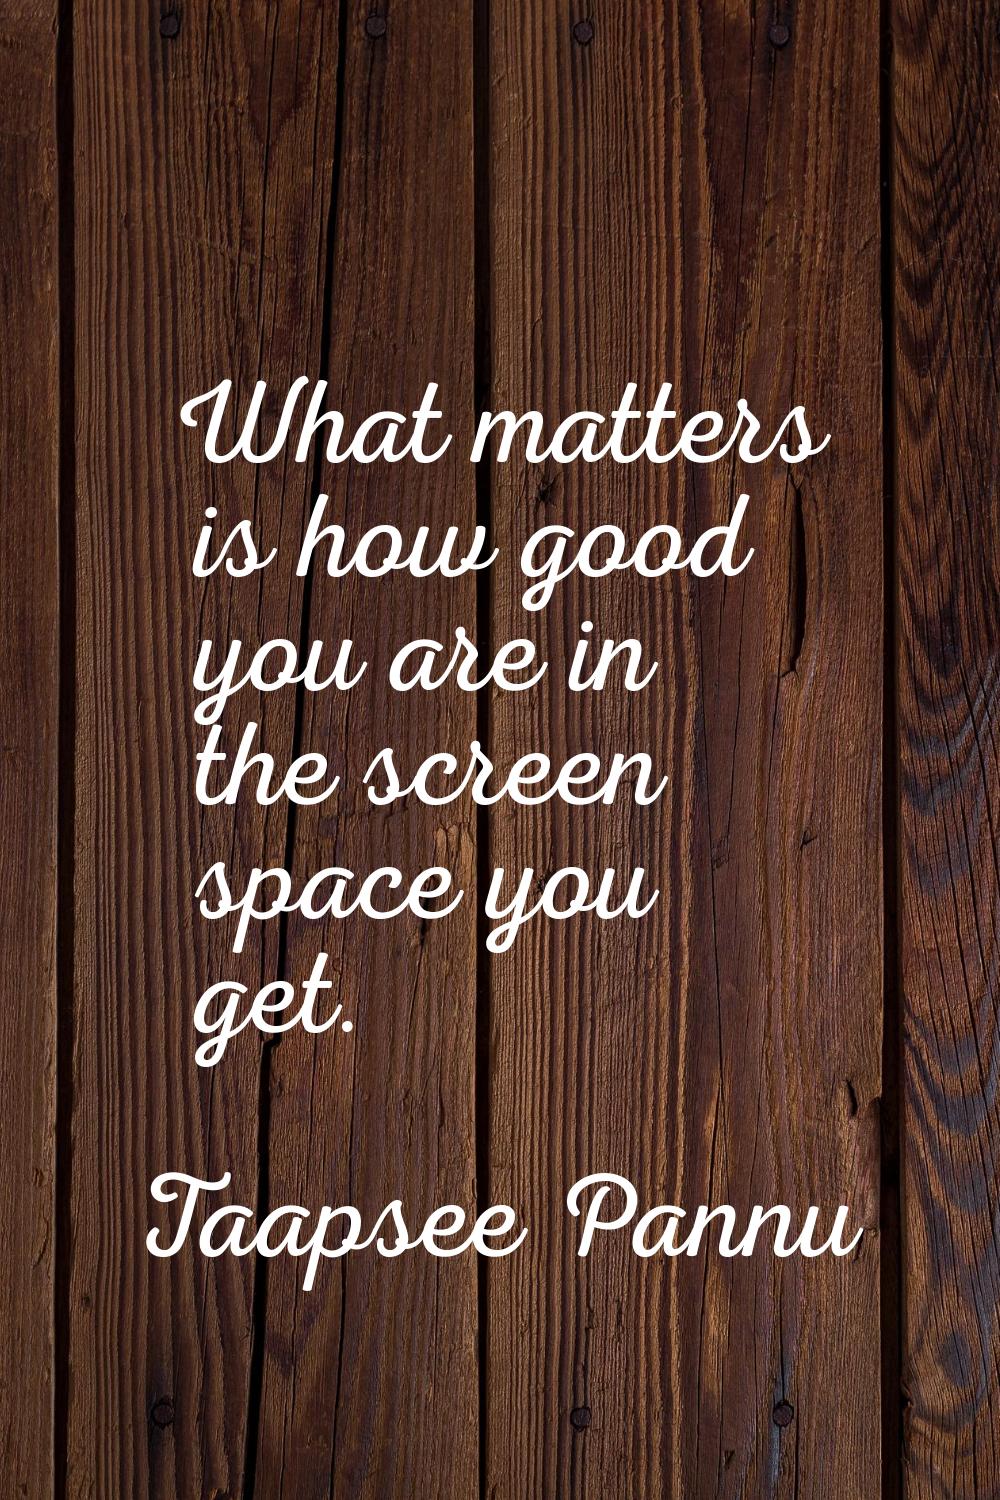 What matters is how good you are in the screen space you get.